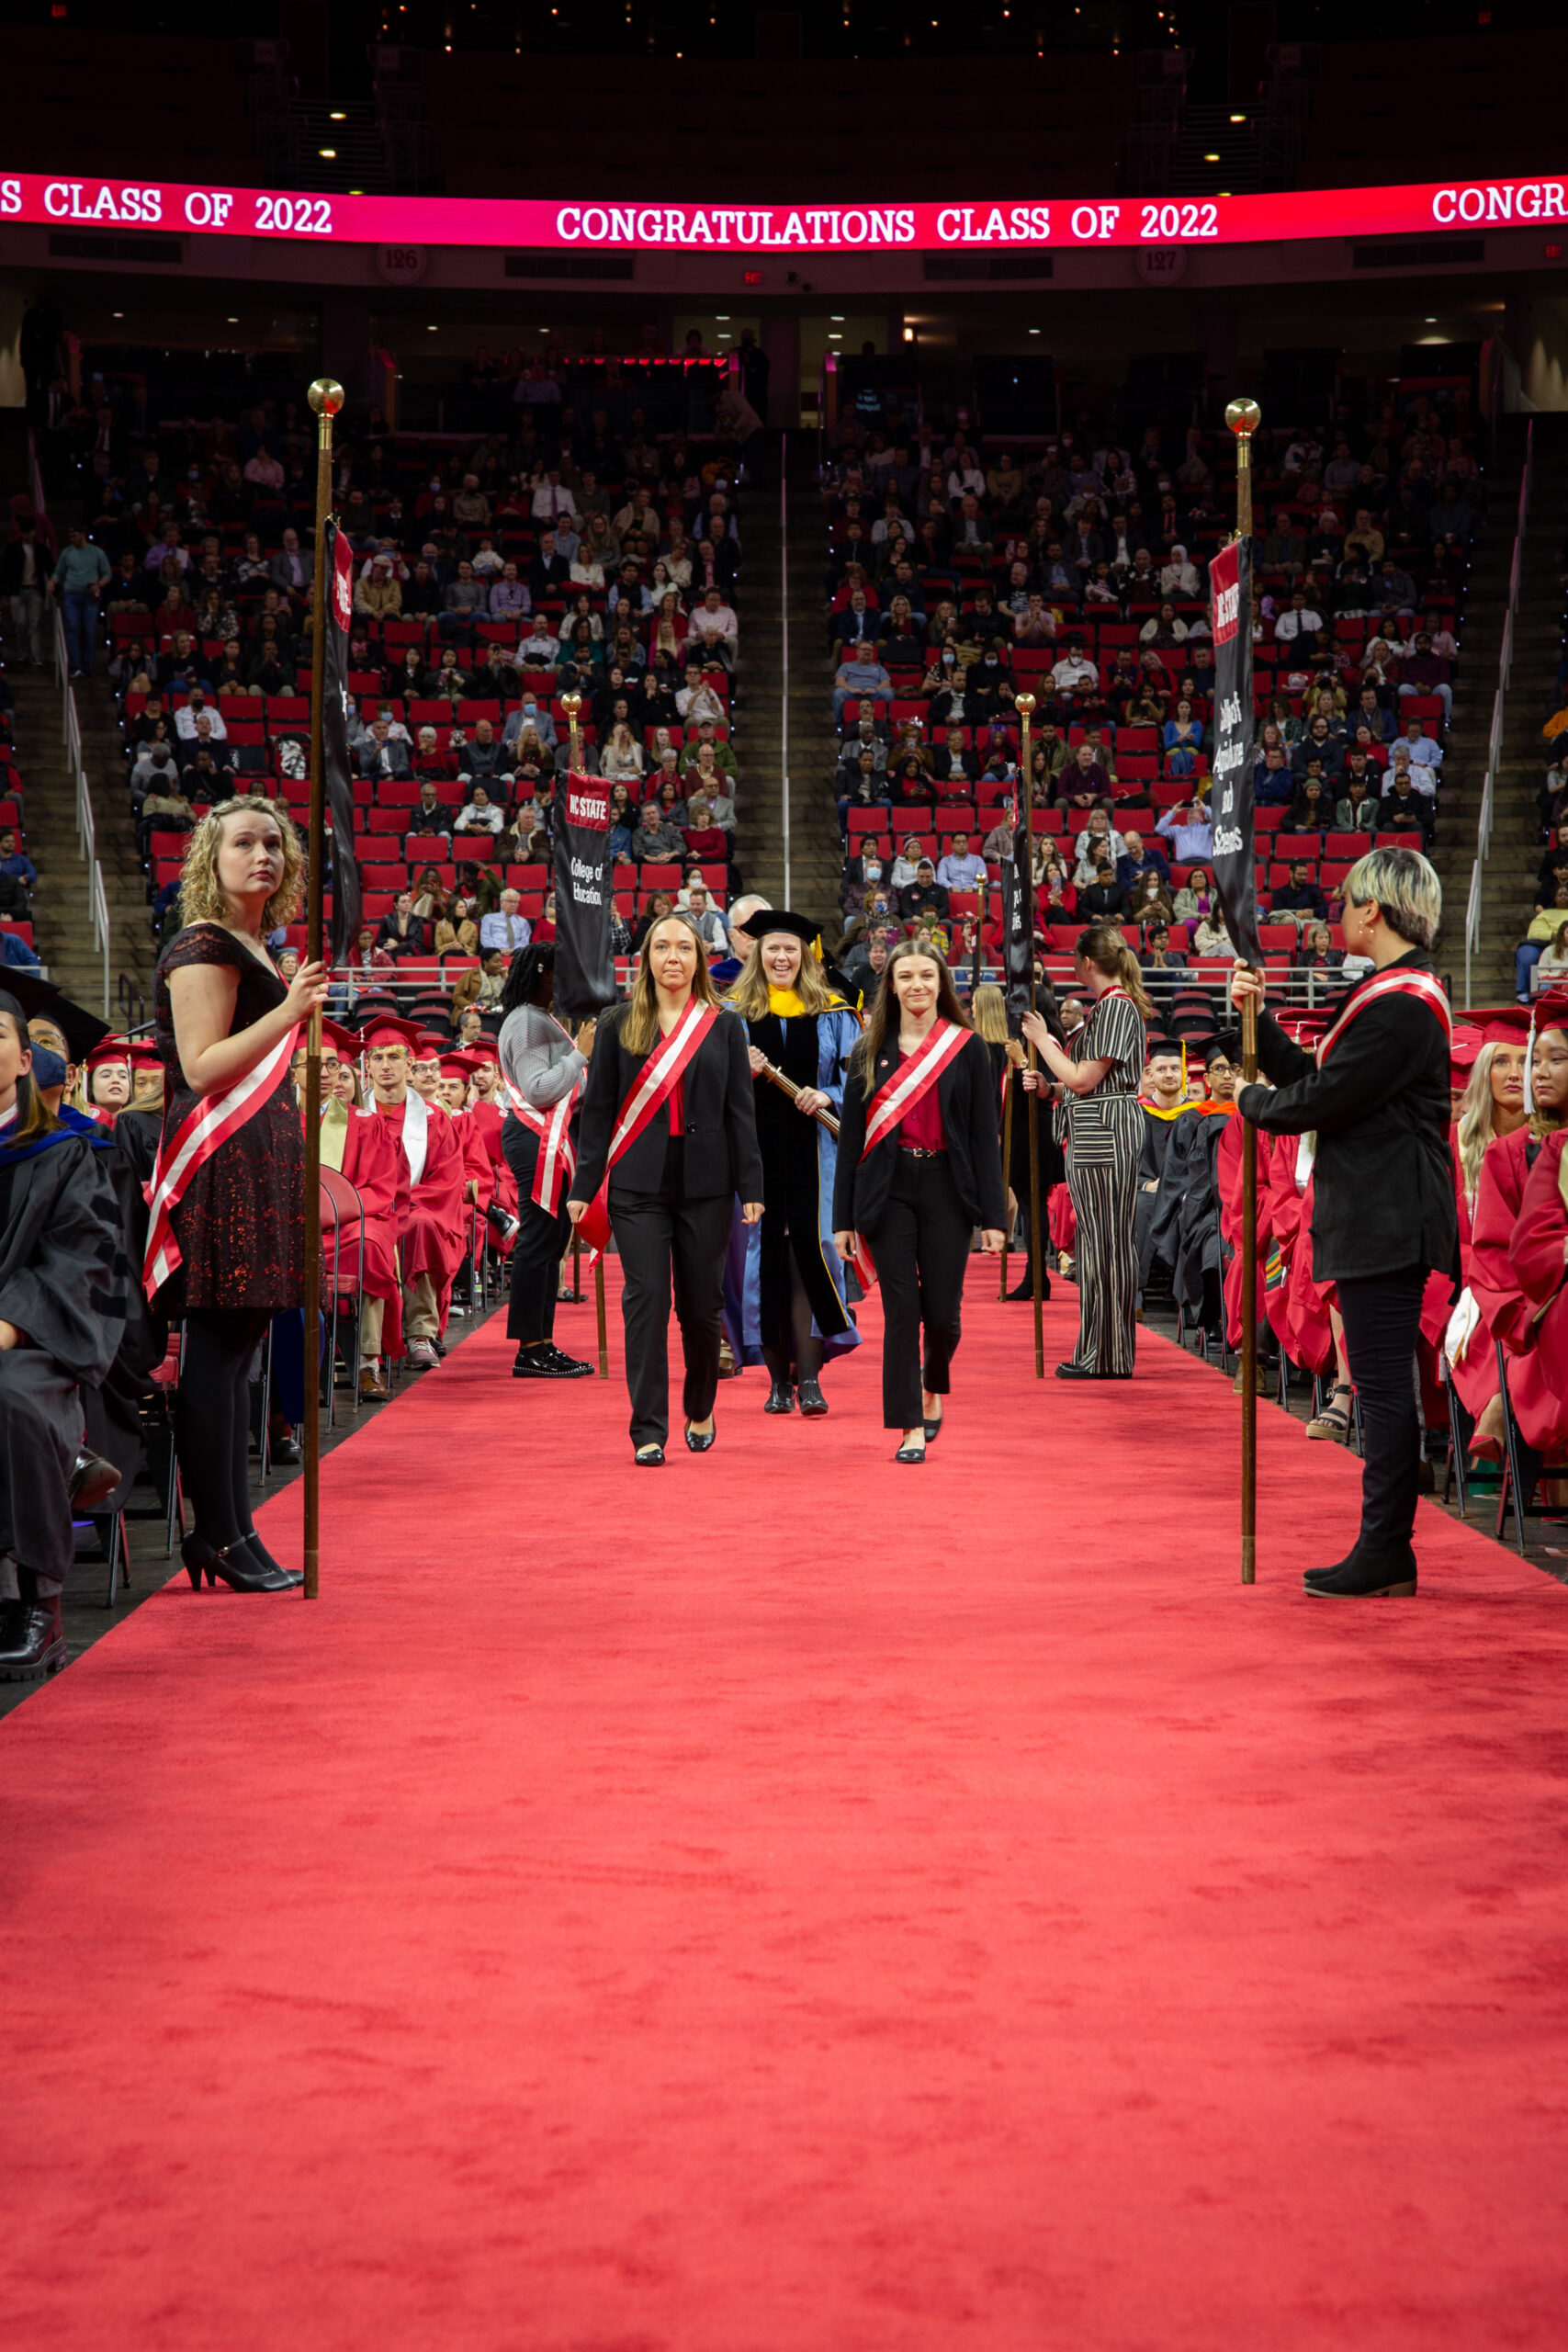 Processional at Fall 2022 Commencement.